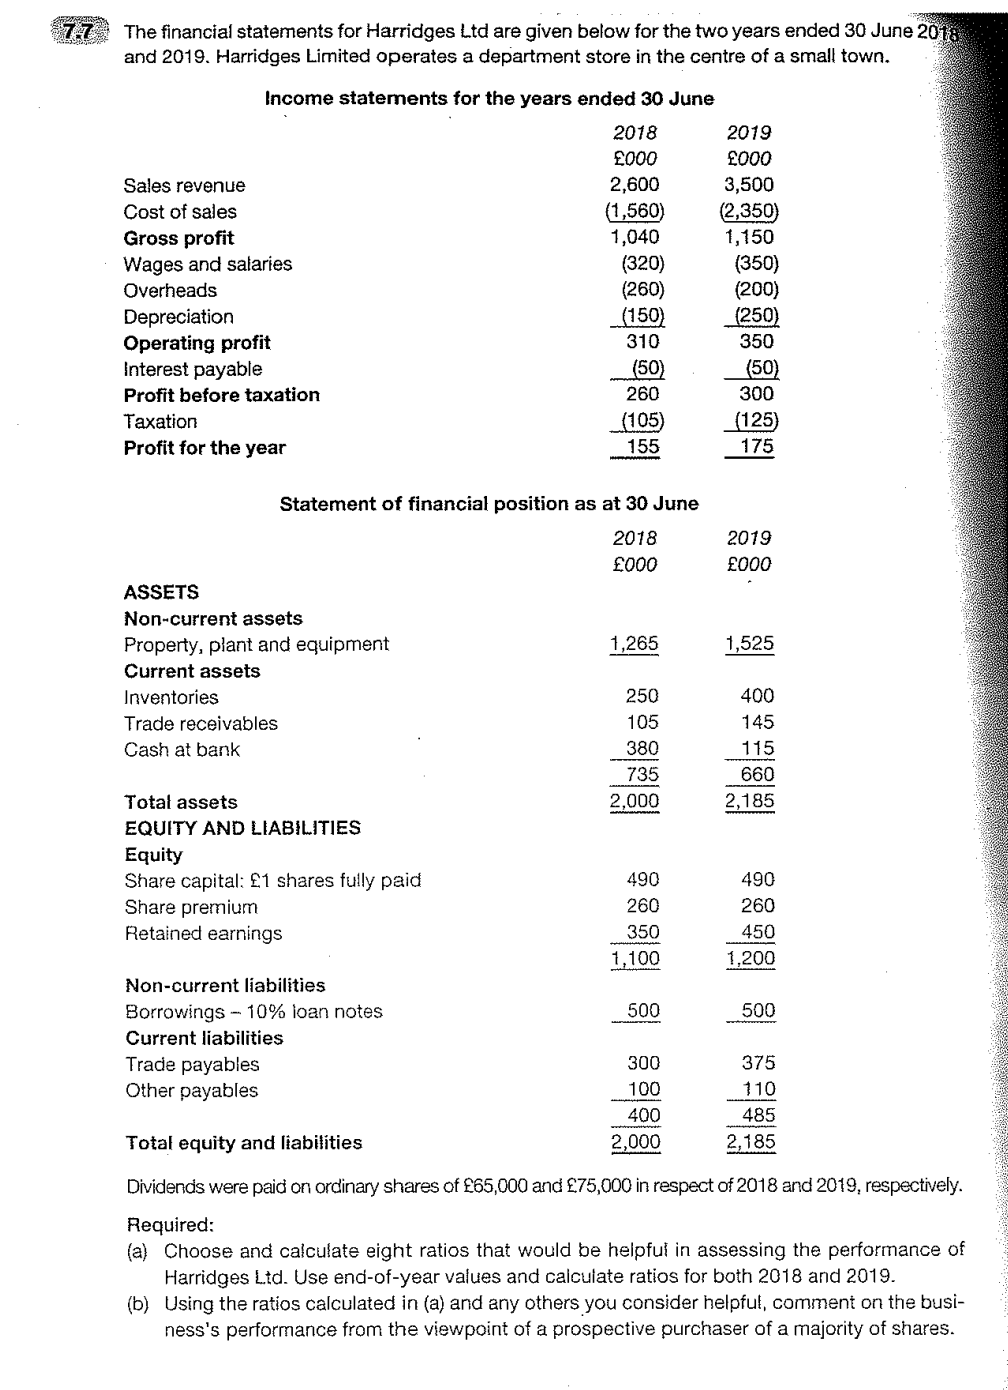 77
The financial statements for Harridges Ltd are given below for the two years ended 30 June 2018
and 2019. Harridges Limited operates a department store in the centre of a small town.
Sales revenue
Cost of sales
Income statements for the years ended 30 June
2018
£000
2,600
(1,560)
1,040
Gross profit
Wages and salaries
Overheads
Depreciation
Operating profit
Interest payable
Profit before taxation
Taxation
Profit for the year
ASSETS
Non-current assets
Property, plant and equipment
Current assets
Inventories
Trade receivables
Cash at bank
Total assets
EQUITY AND LIABILITIES
Equity
Share capital: £1 shares fully paid
Share premium
Retained earnings
Trade payables
Other payables
Non-current liabilities
Borrowings 10% loan notes
Current liabilities
(320)
(260)
(150)
310
Statement of financial position as at 30 June
2018
£000
(50)
260
(105)
155
1,265
250
105
380
735
2,000
490
260
350
1,100
500
300
100
400
2,000
2019
£000
3,500
(2,350)
1,150
(350)
(200)
(250)
350
(50)
300
(125)
175
2019
£000
1,525
400
145
115
660
2,185
490
260
450
1,200
500
375
110
485
2,185
Total equity and liabilities
Dividends were paid on ordinary shares of £65,000 and £75,000 in respect of 2018 and 2019, respectively.
Required:
(a) Choose and calculate eight ratios that would be helpful in assessing the performance of
Harridges Ltd. Use end-of-year values and calculate ratios for both 2018 and 2019.
(b) Using the ratios calculated in (a) and any others you consider helpful, comment on the busi-
ness's performance from the viewpoint of a prospective purchaser of a majority of shares.